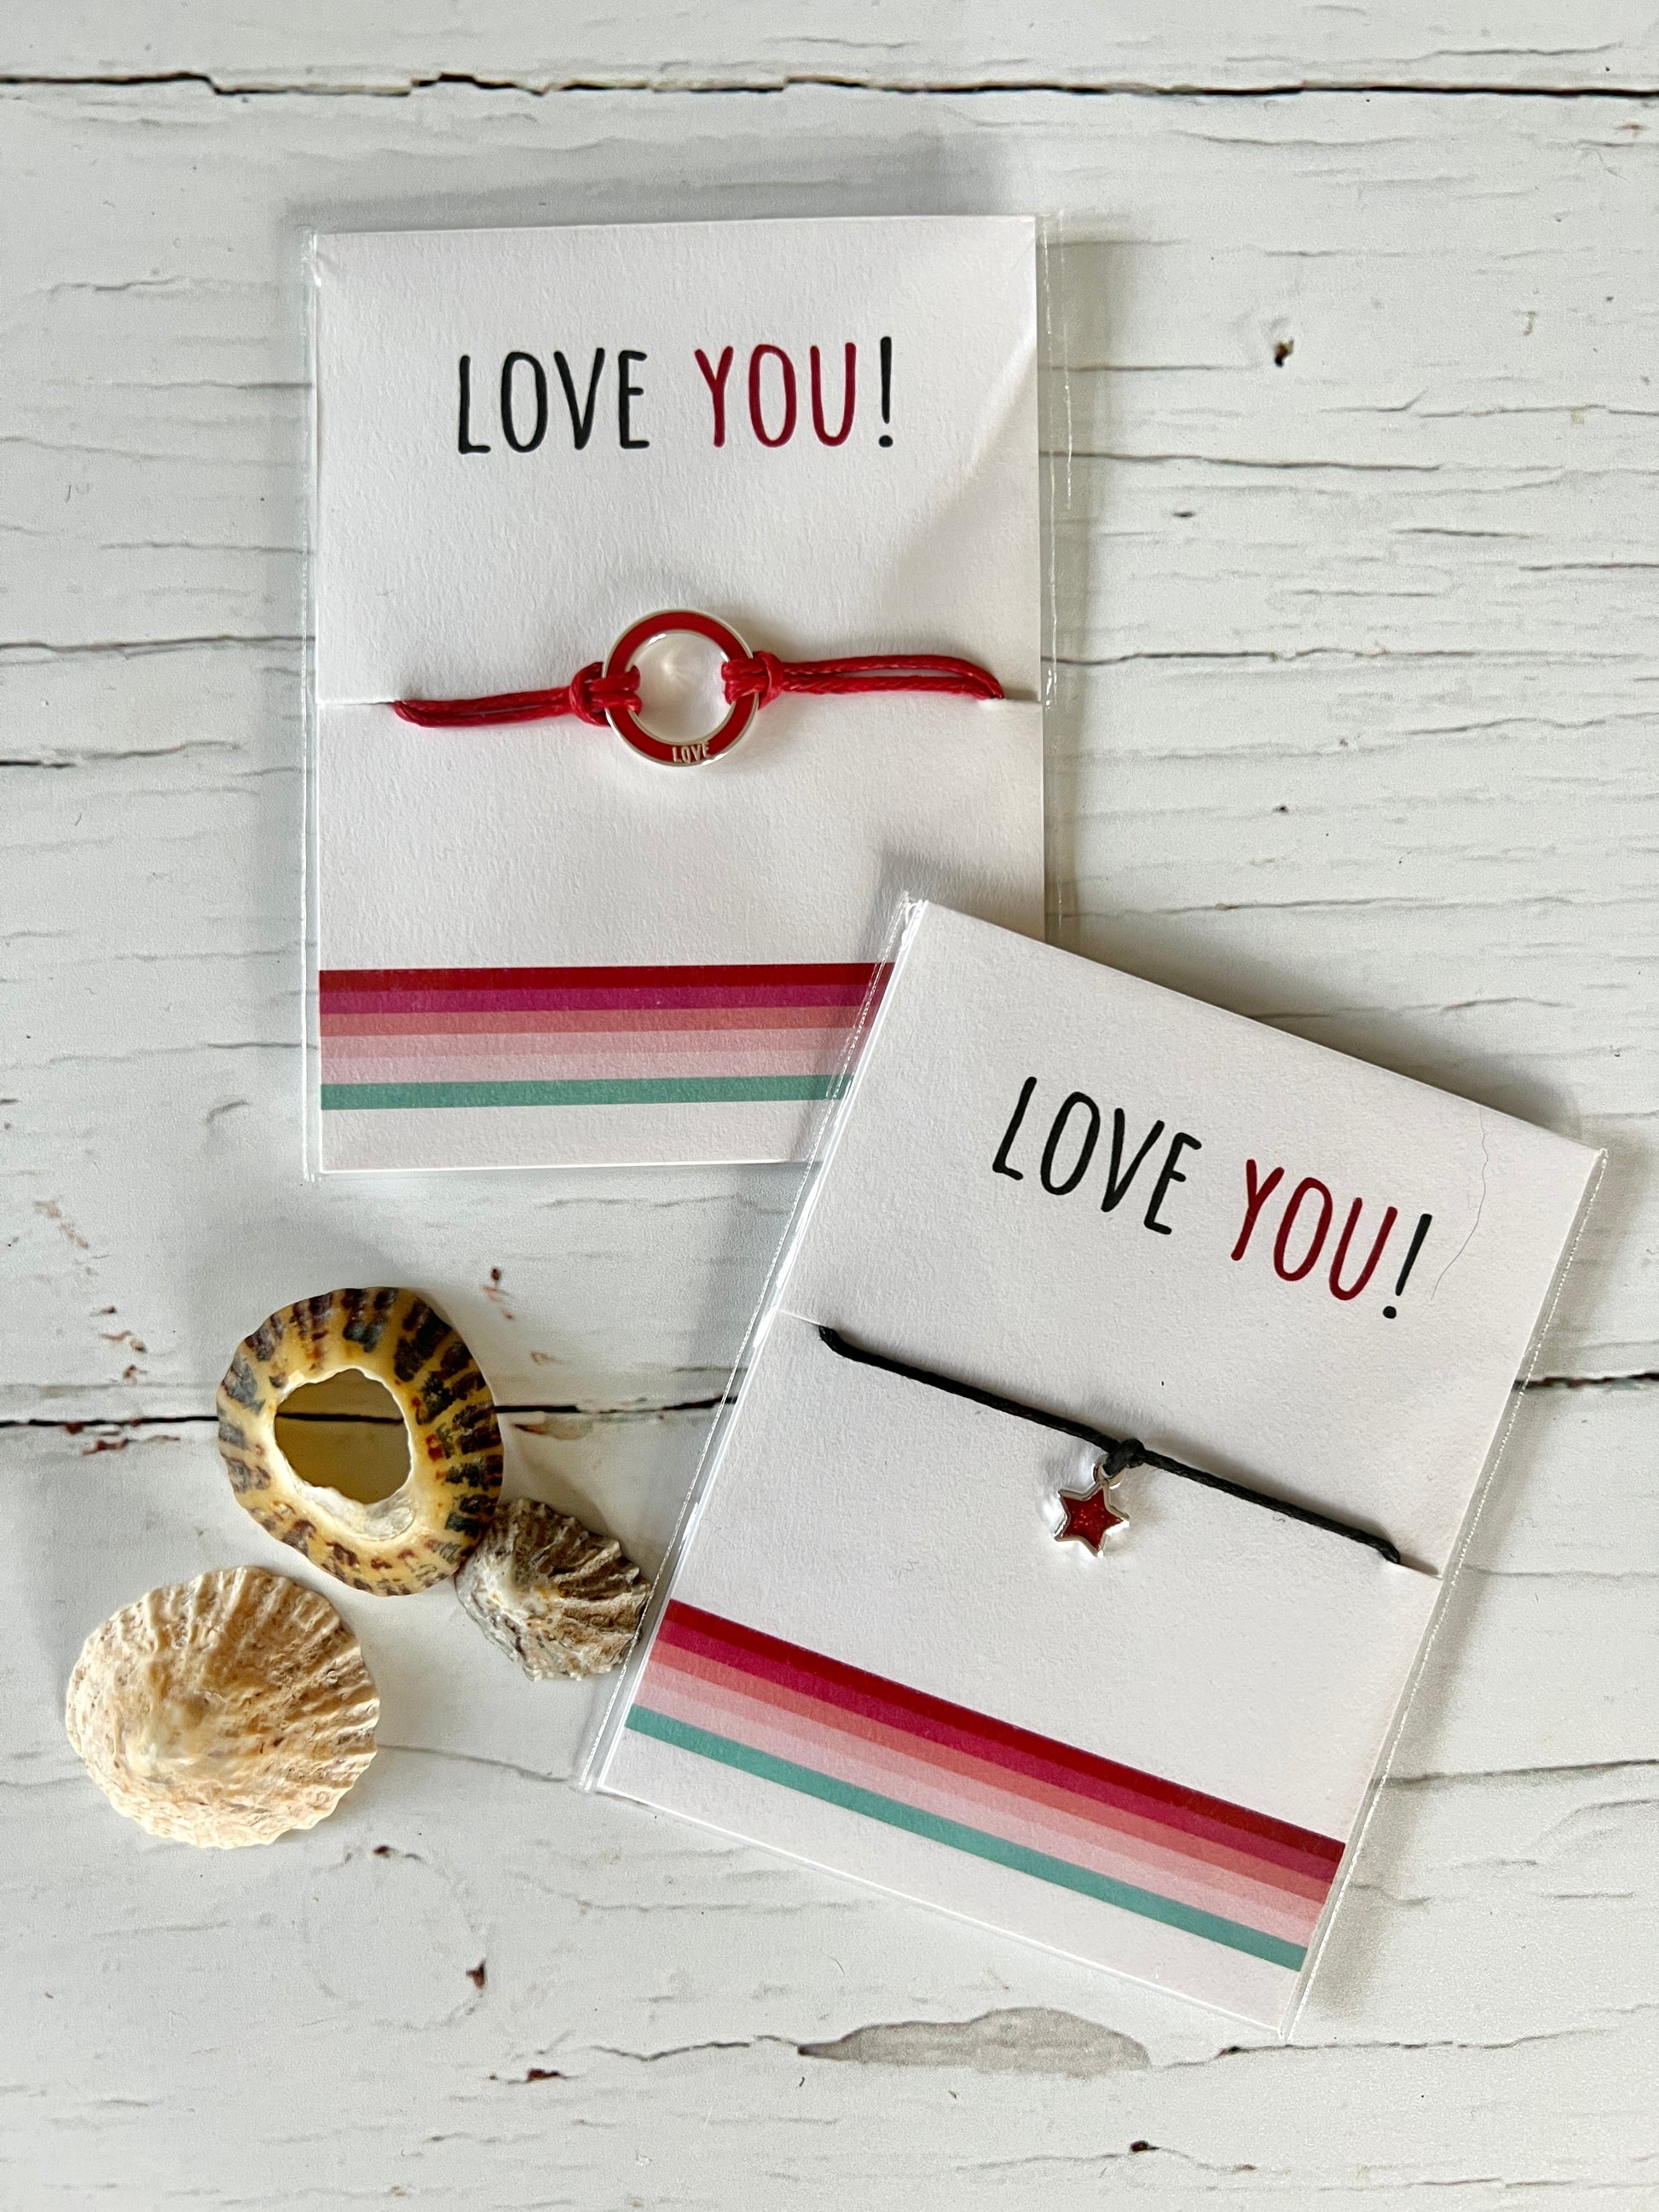 Two Valentine's string bracelets on presentation cards which say Love You. One bracelet has red cord and a red enamel disc and the other has a black cord and a red glittery enamel disc